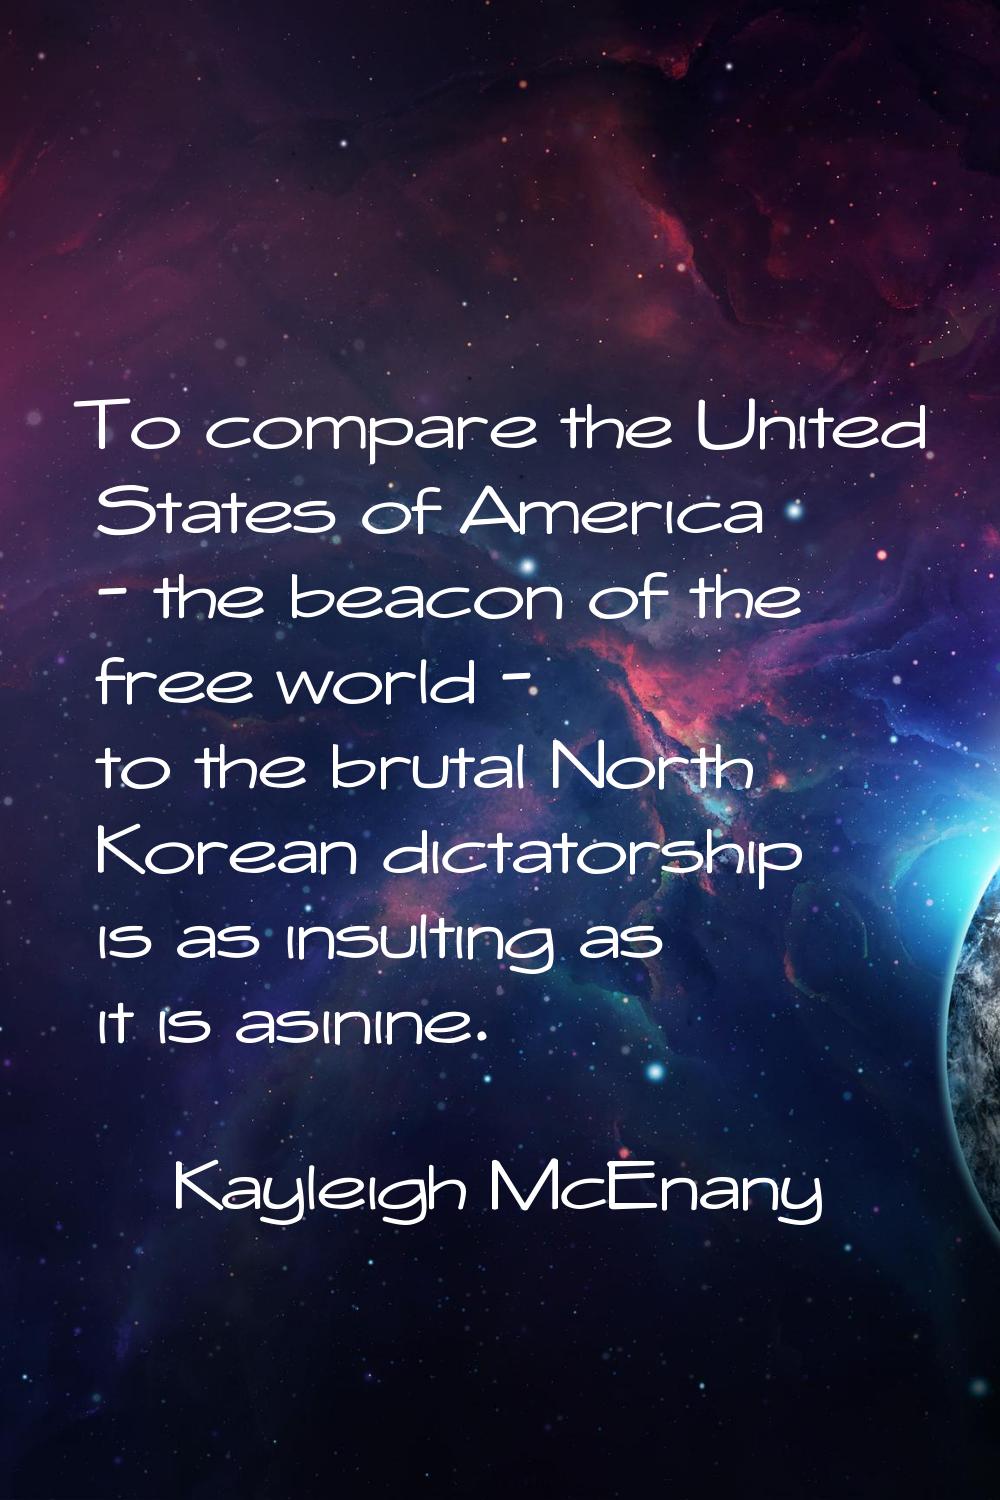 To compare the United States of America - the beacon of the free world - to the brutal North Korean